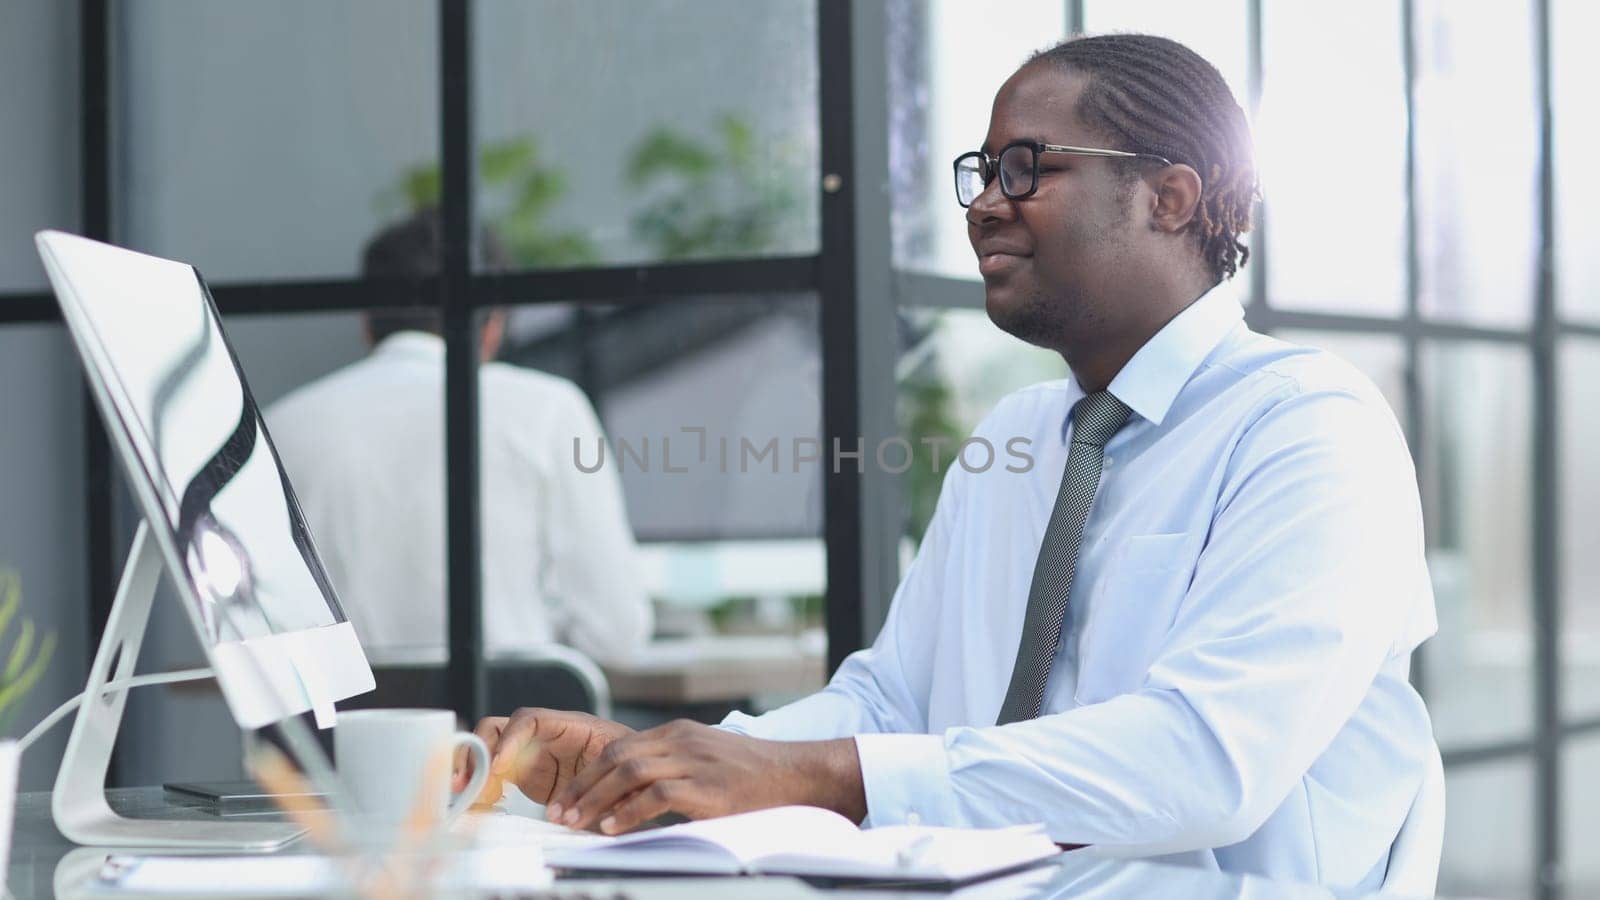 portrait of a man at his workplace at the table in front of the computer smiling by Prosto